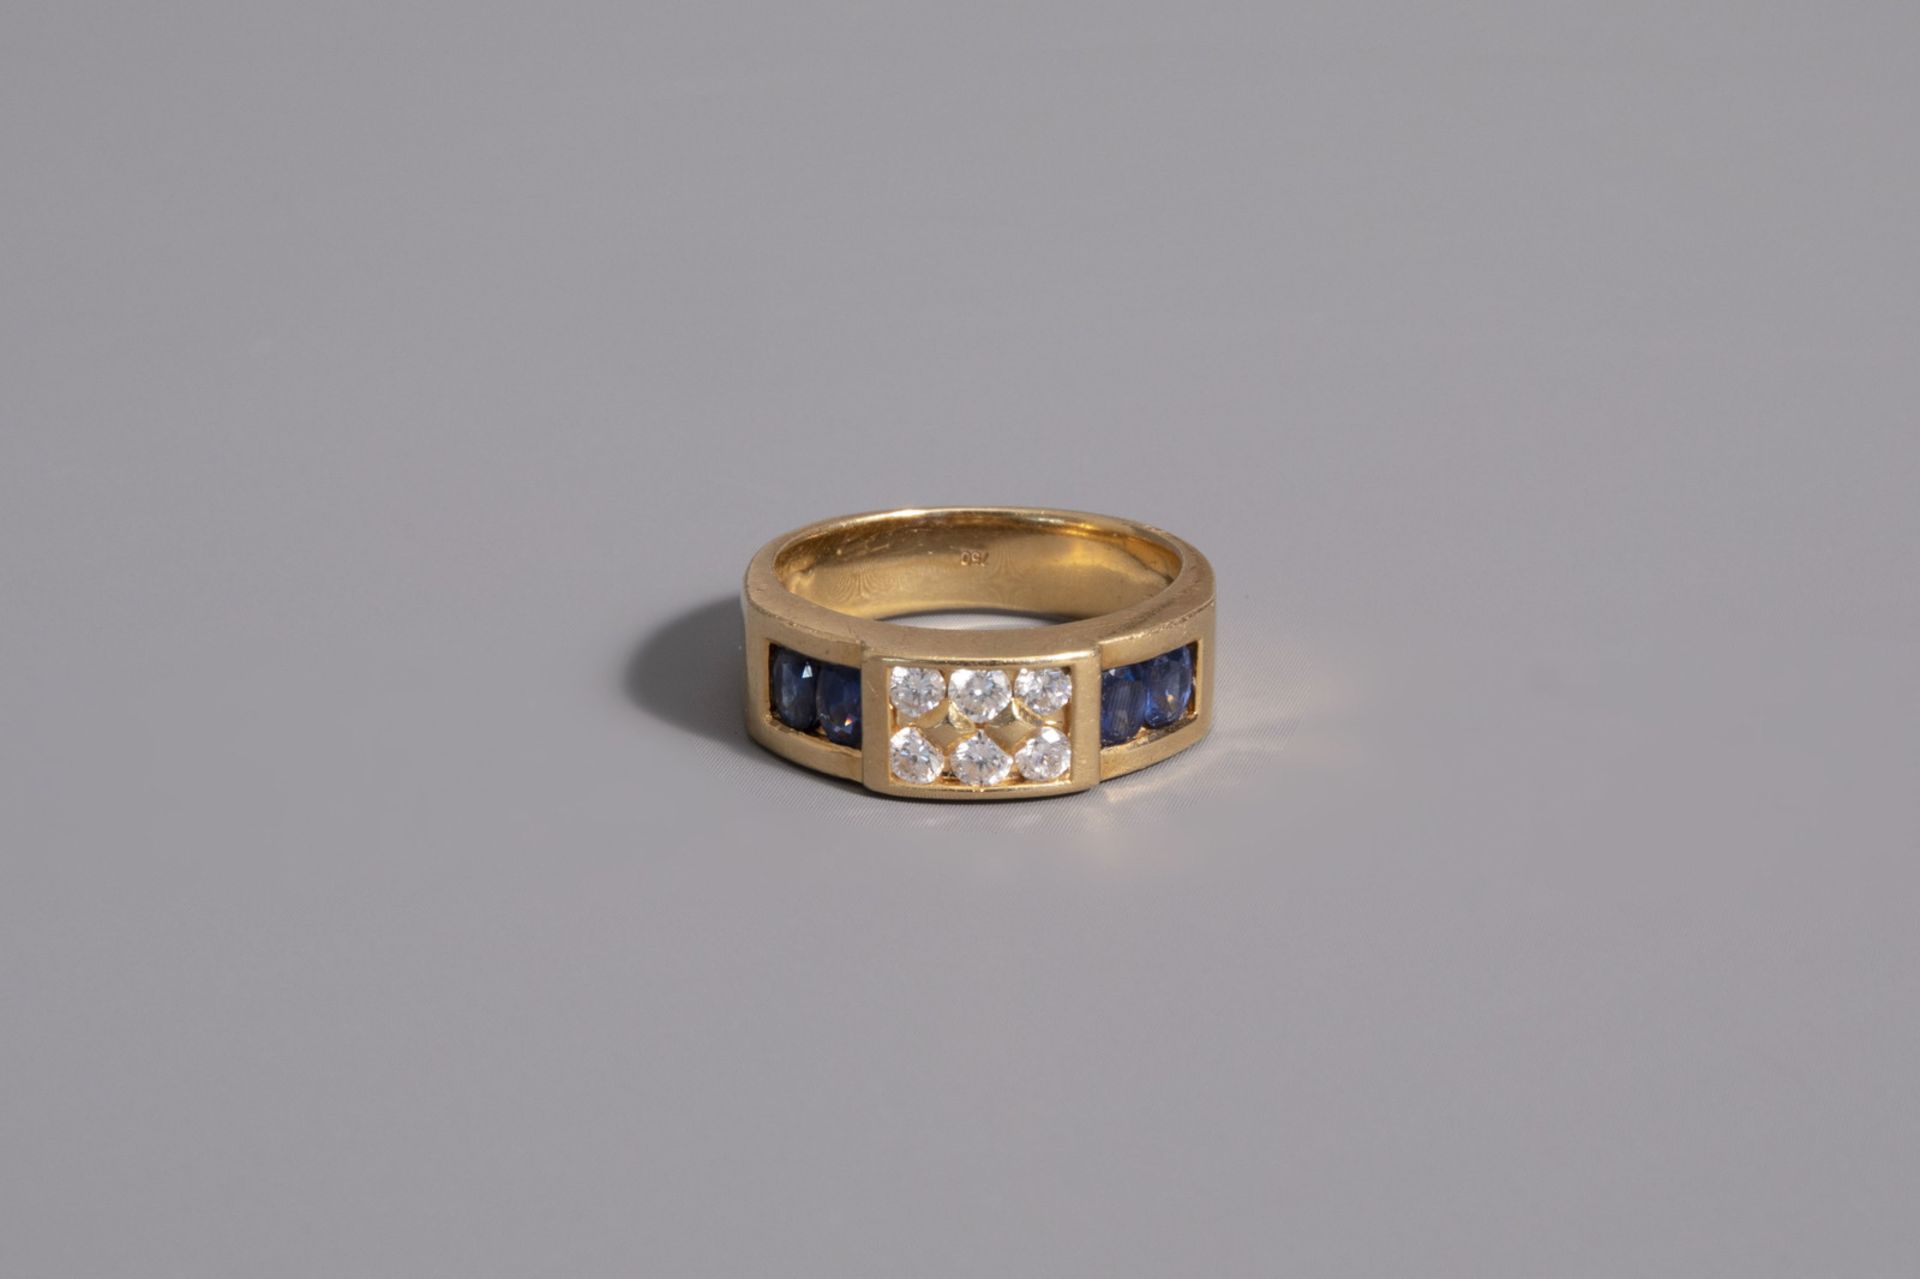 An 18 carat yellow gold ring set with four blue sapphires and six diamonds, 20th C.